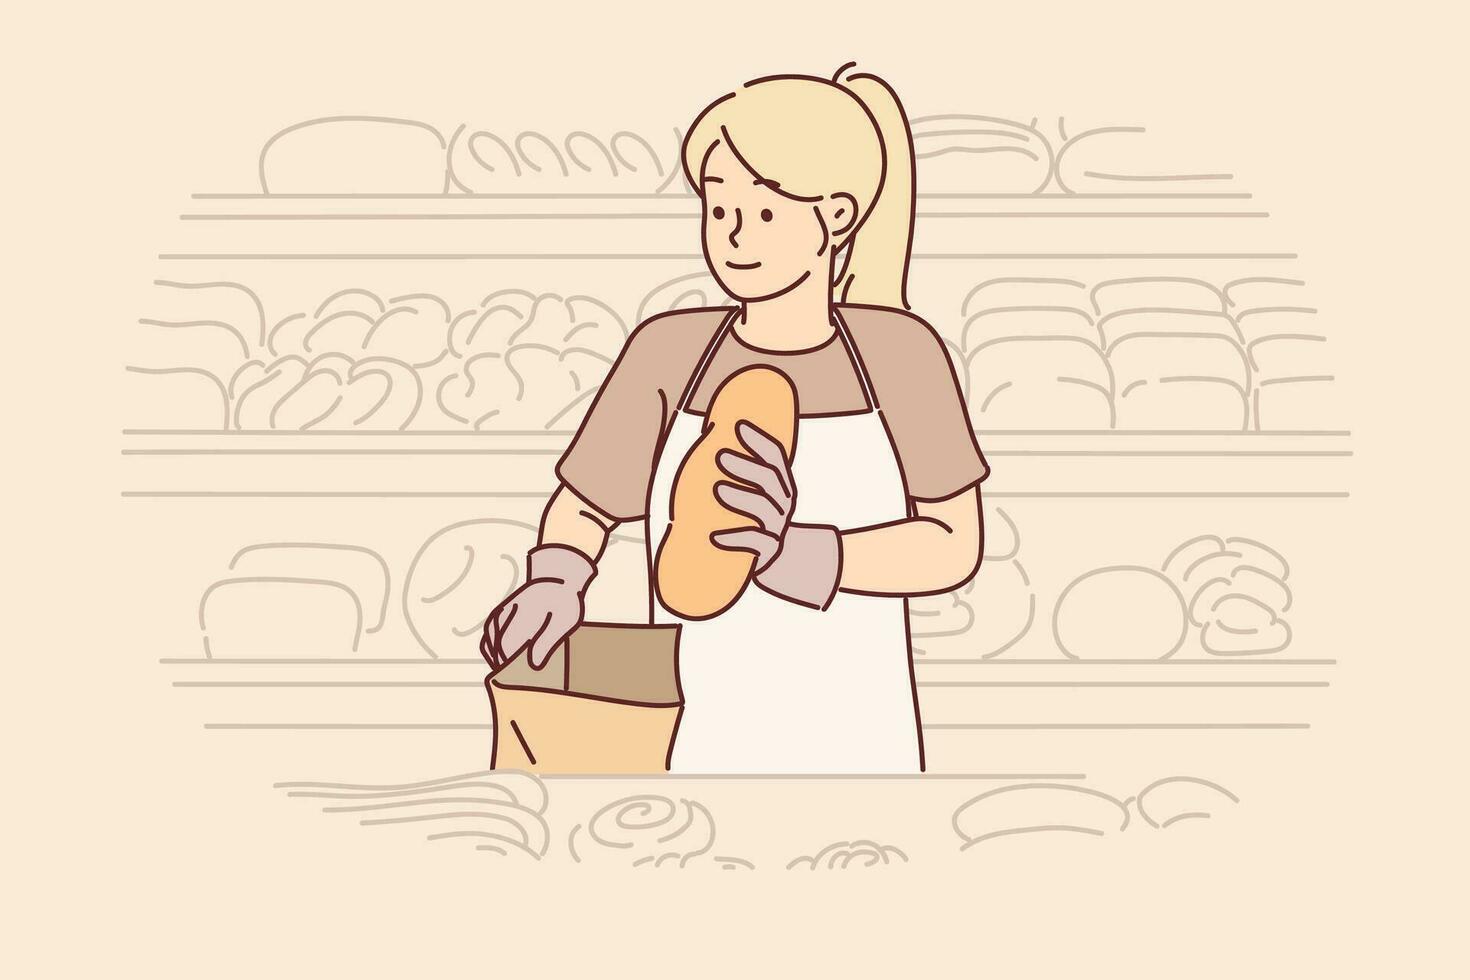 Woman stands in bakery putting bread in paper bag and working as sales assistant to help choose delicious product. Girl seller from bakery dressed in apron, near racks with freshly baked baguettes vector